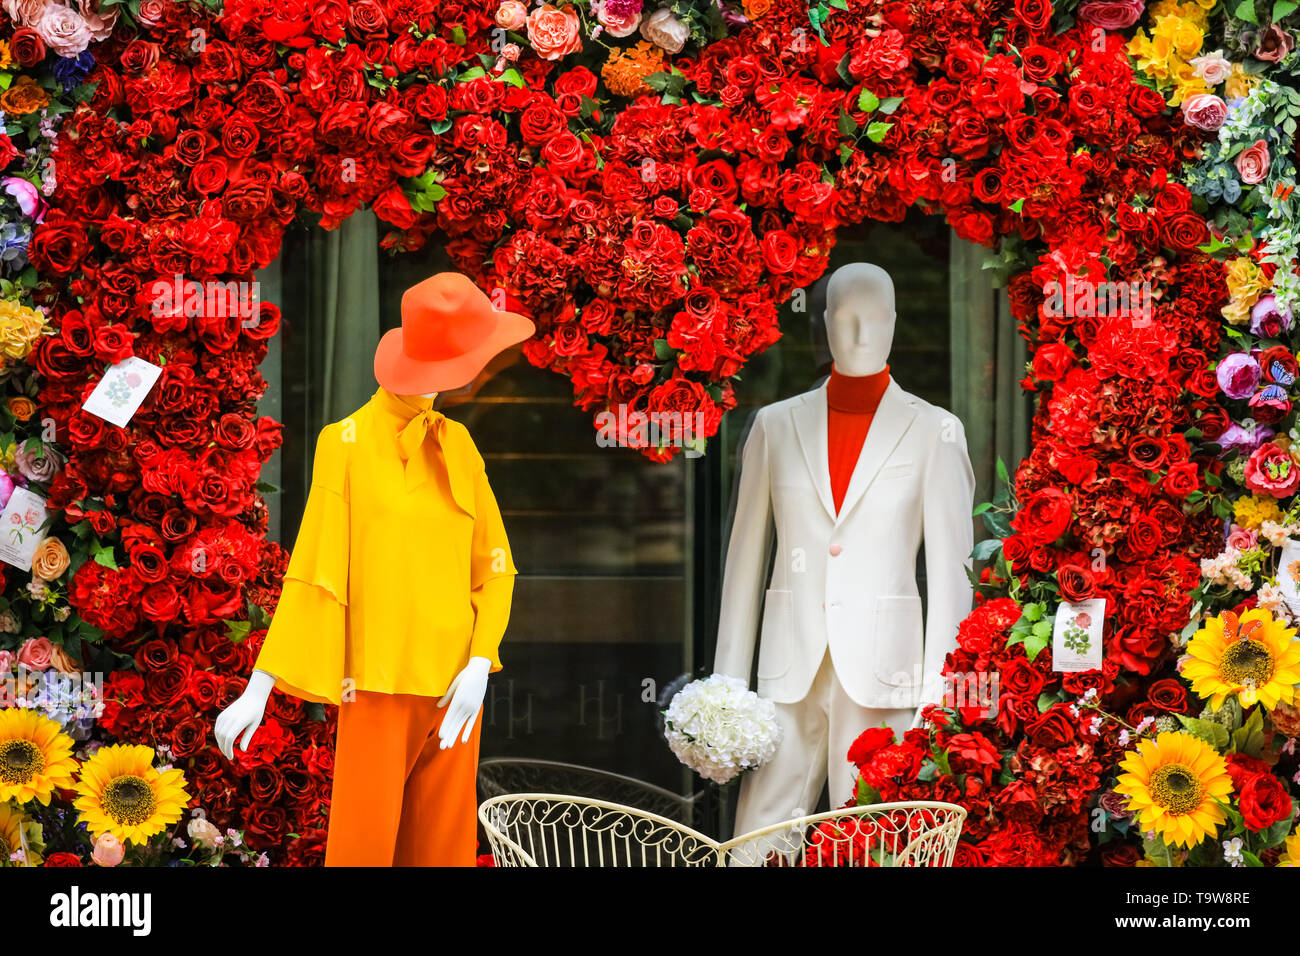 Belgravia, London, UK, 20th May 2019. The Hari Hotel has created a spectacular heart shaped floral display with sixties inspired figures and a love seat, which is popular with passers-by taking photos. Belgravia's fourth annual floral festival coincides with the RHS Chelsea Flower Show in neighbouring Chelsea. Credit: Imageplotter/Alamy Live News Stock Photo